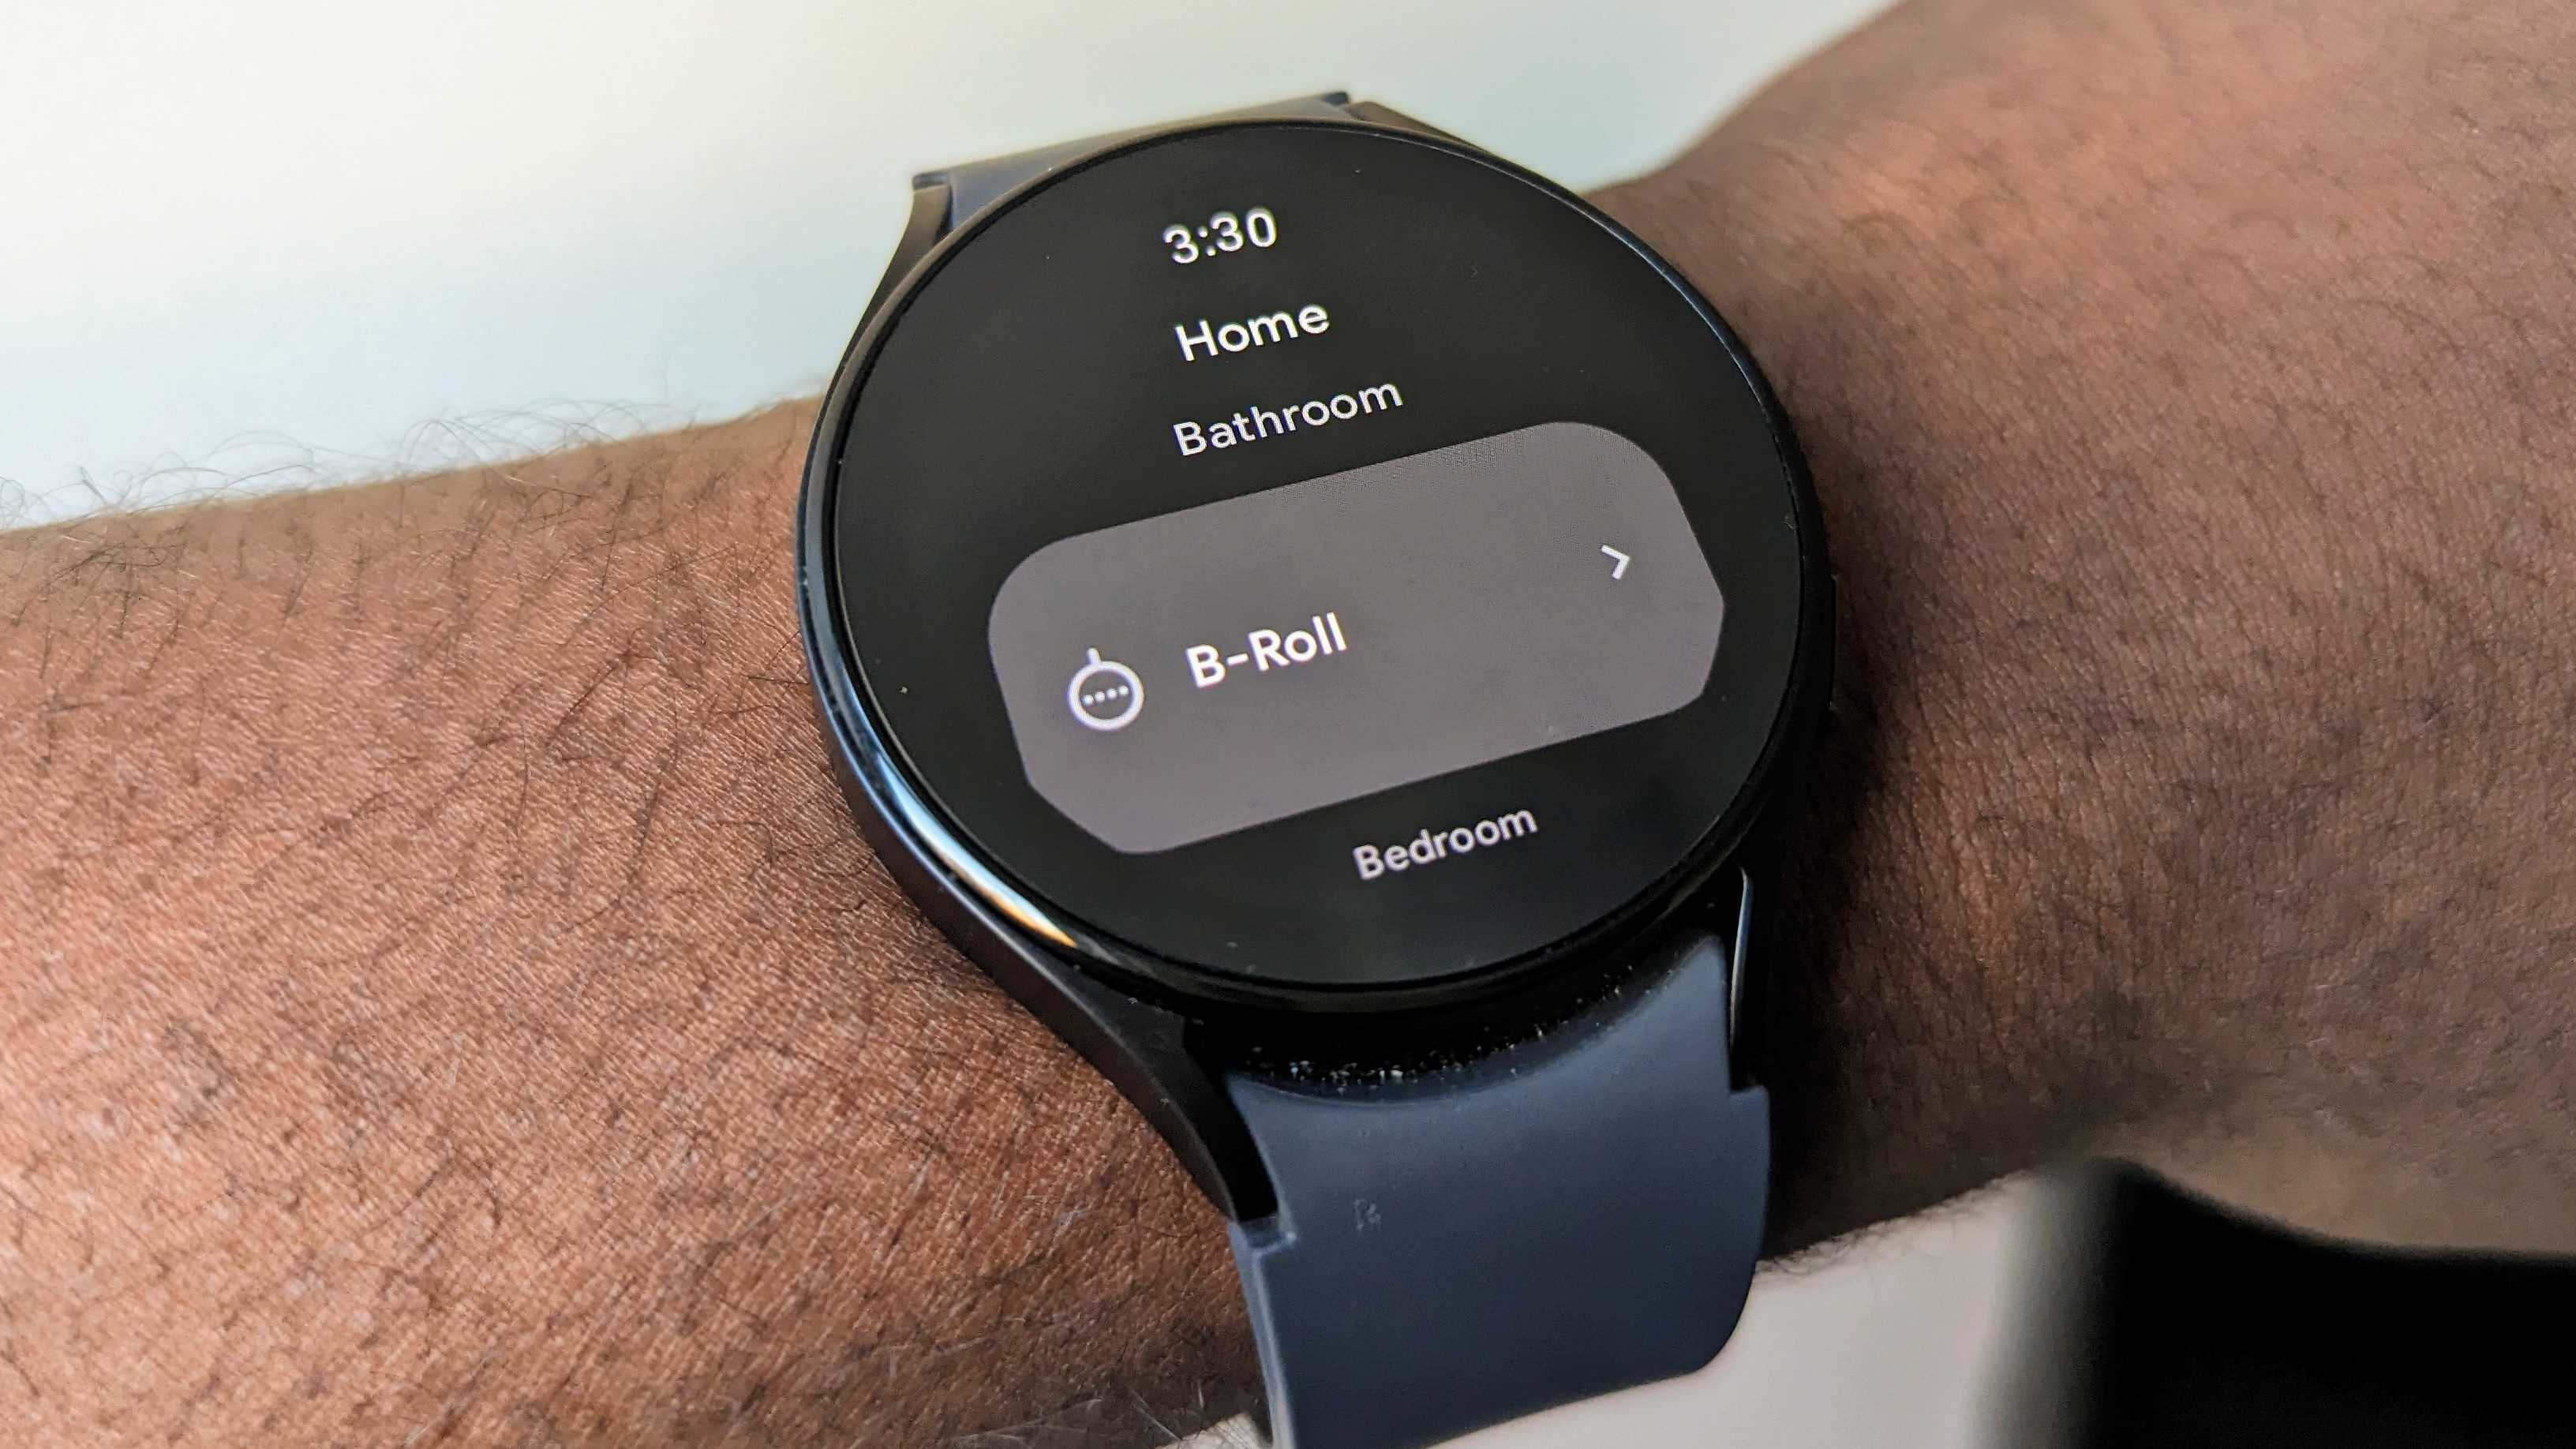 The updated Google Home app previews on the Galaxy Watch 5